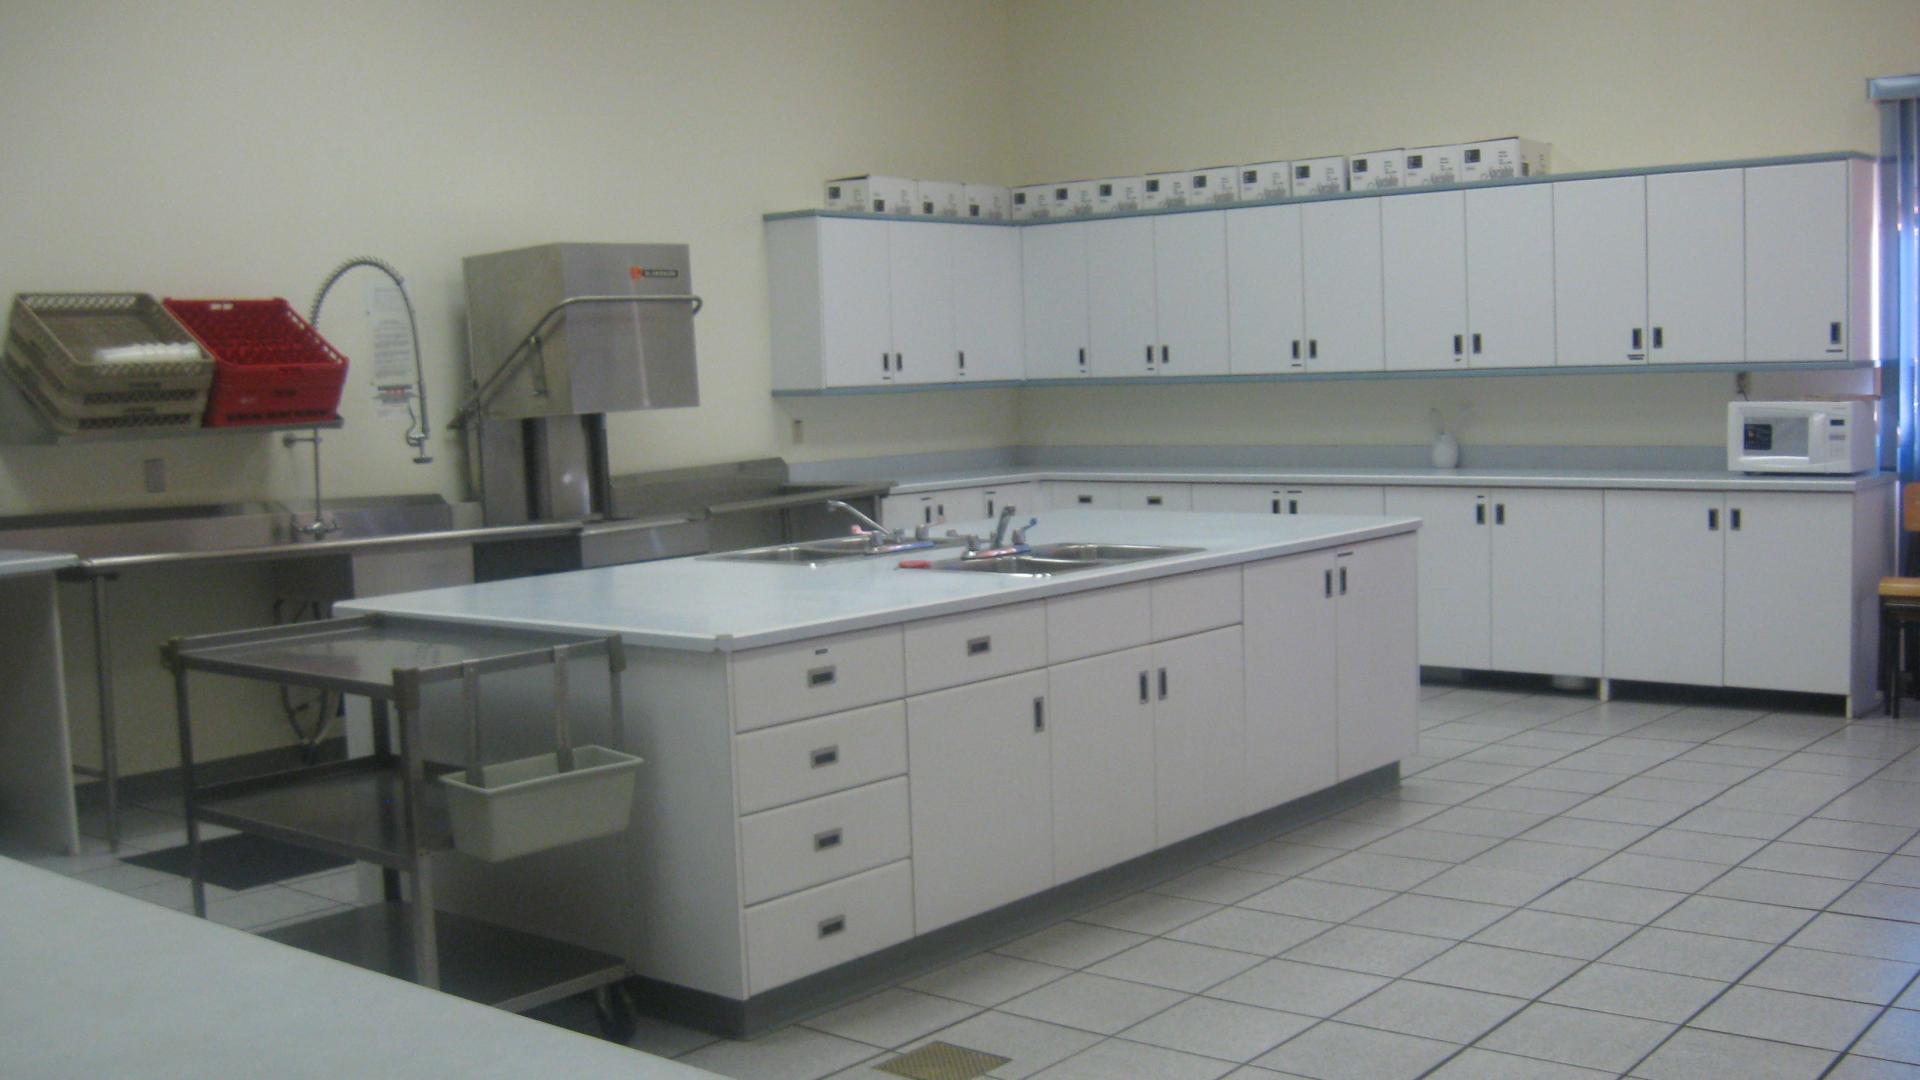 Spacious kitchen / food prep area. There are many cabinets and lots of table surface. There are also some kitchen appliances at the back of the room.